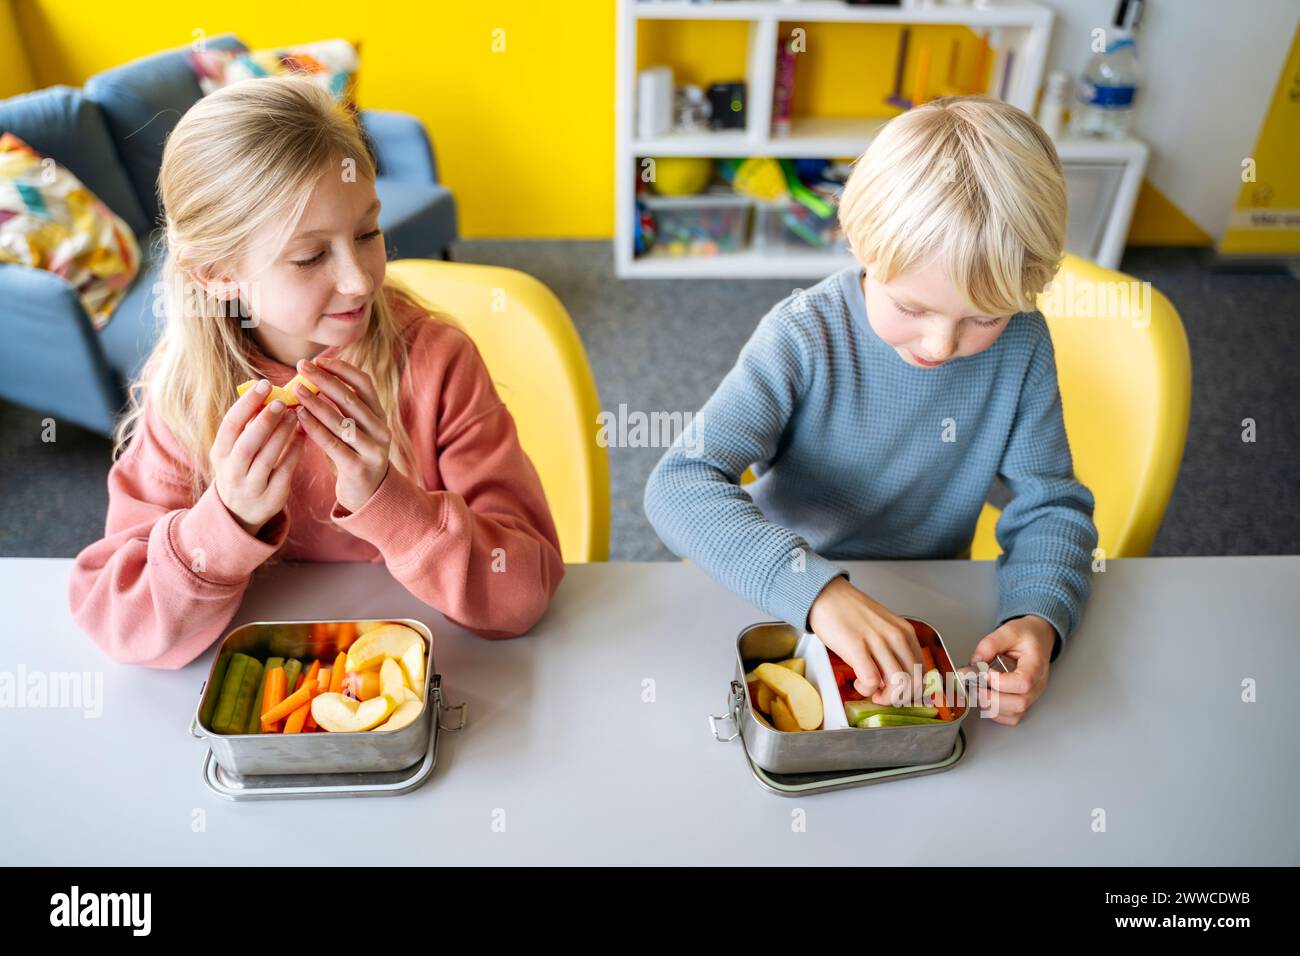 Blond boy and girl eating fruits and vegetables in lunch box at desk Stock Photo